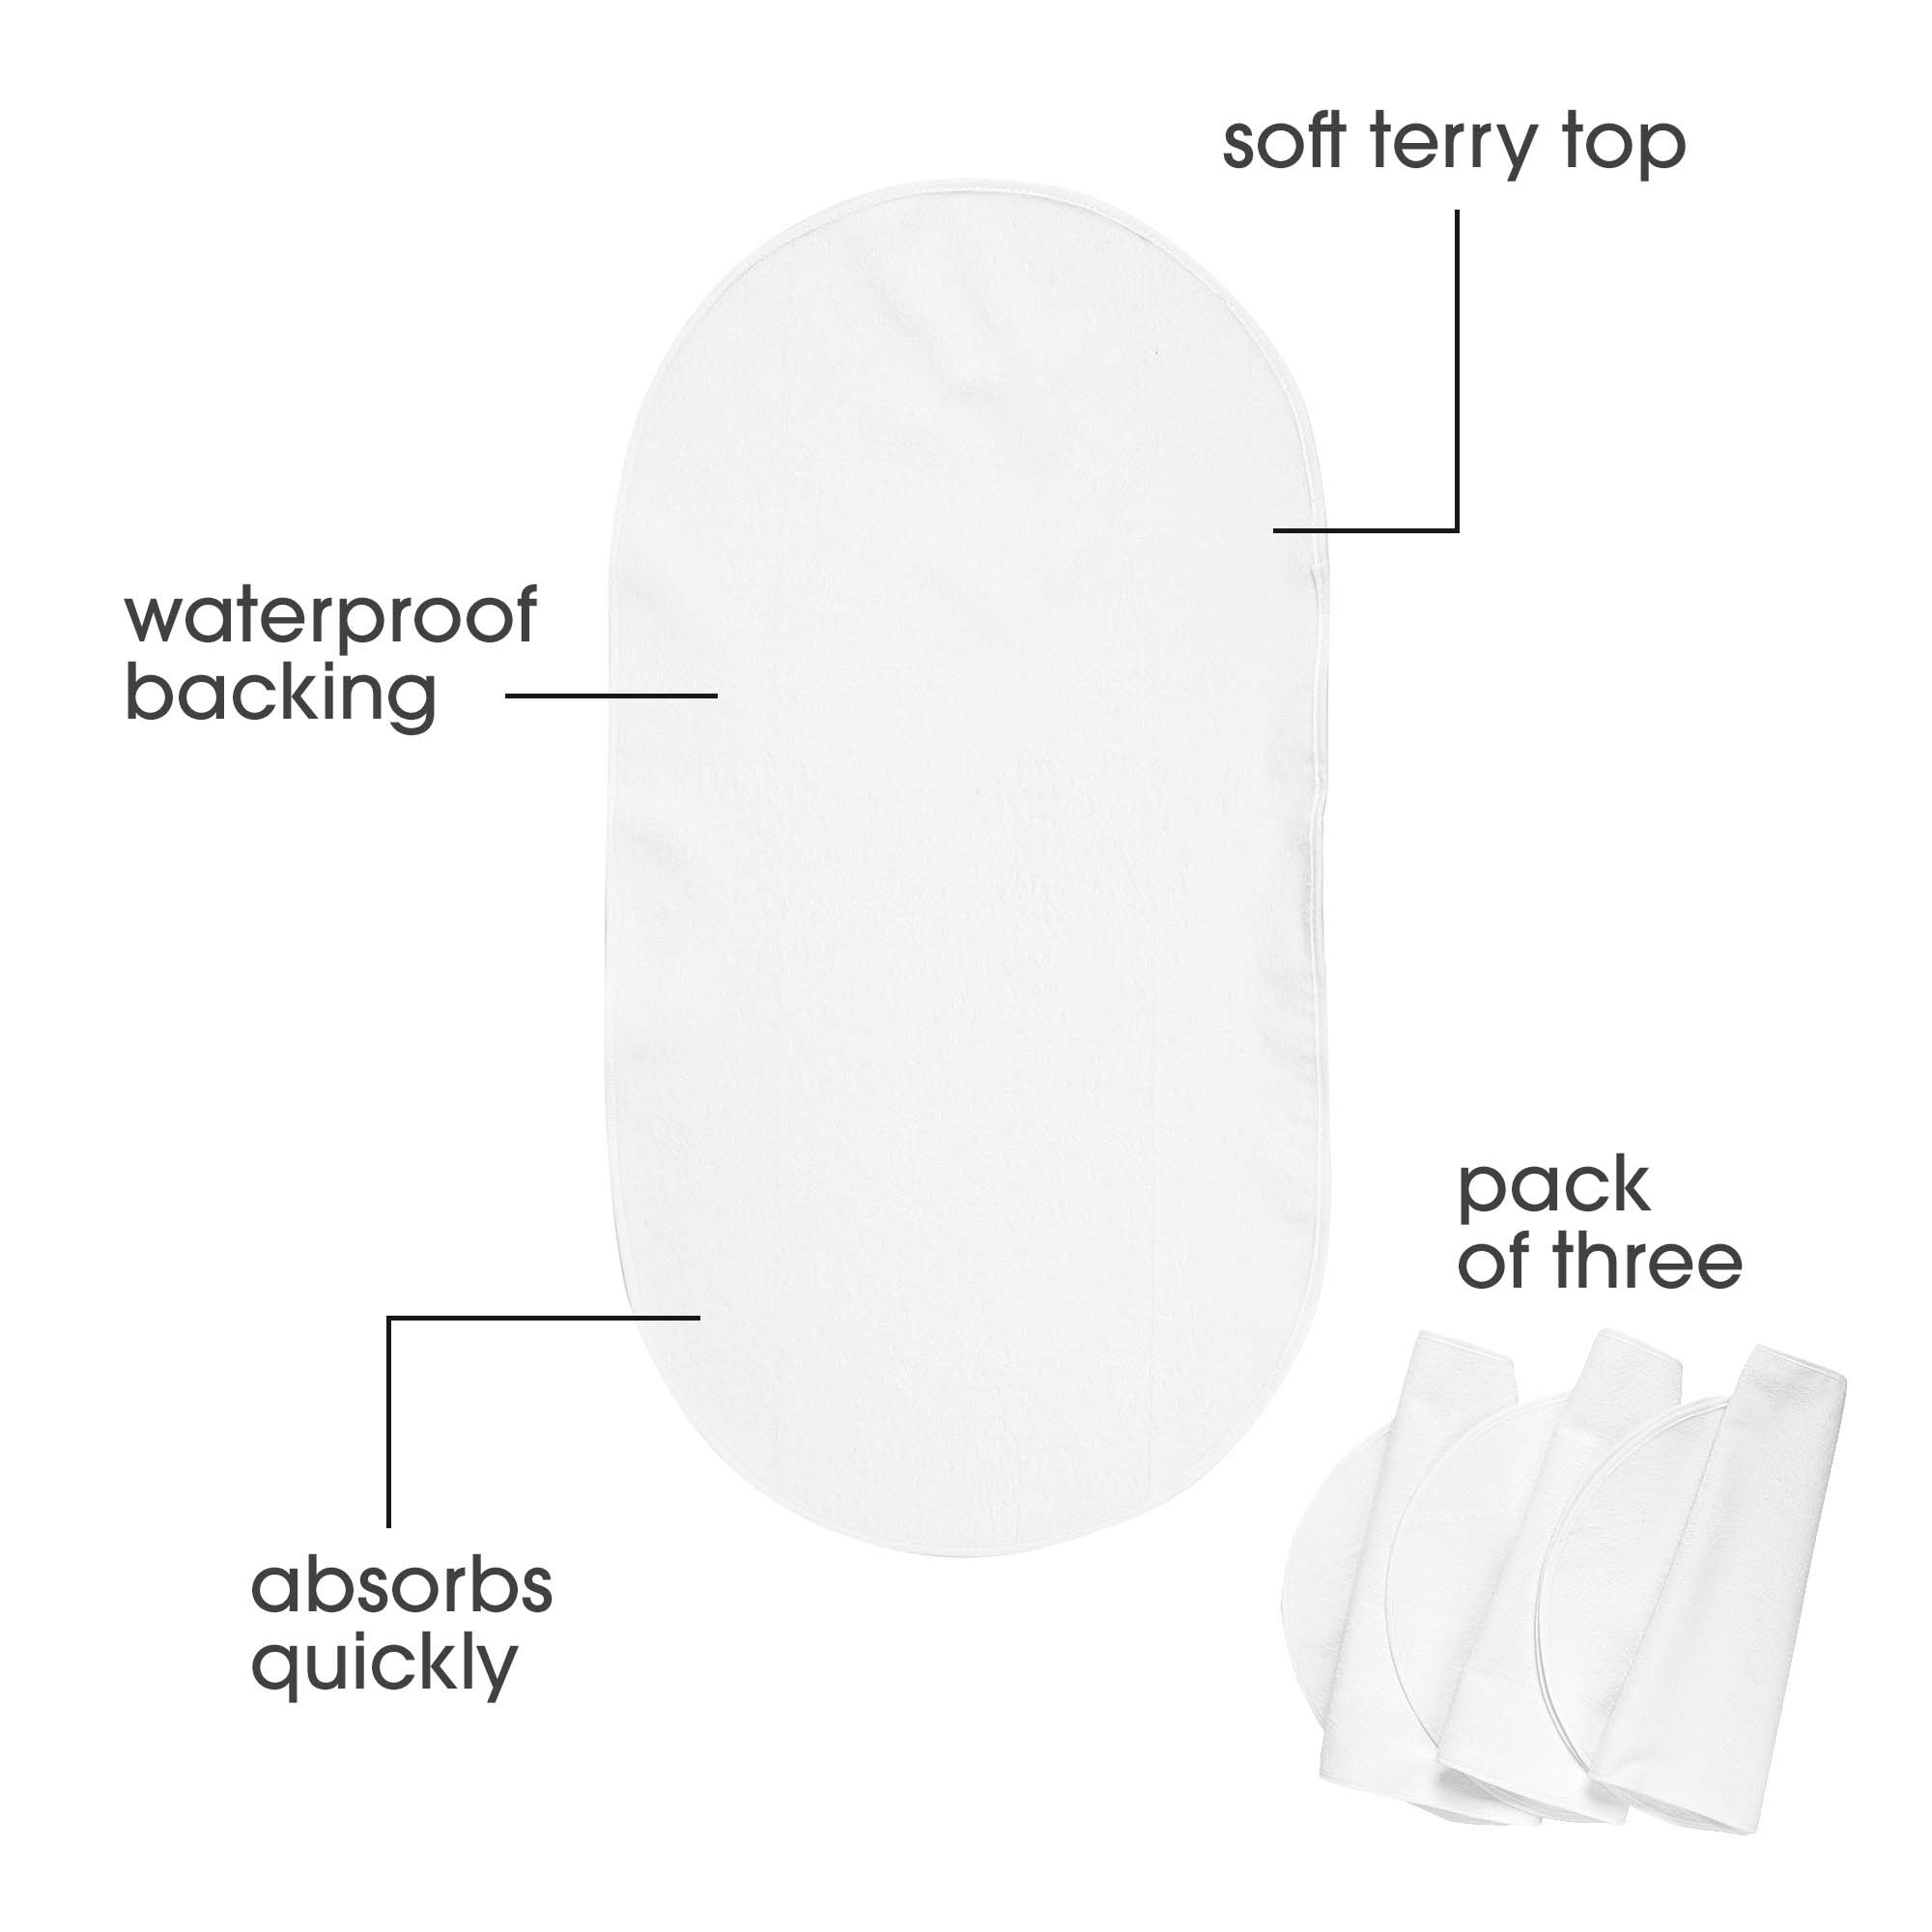 Boppy Changing Pad Liners, Pack of 3, White, Waterproof Backing, Easier Diaper Changes, Machine Washable - image 2 of 8